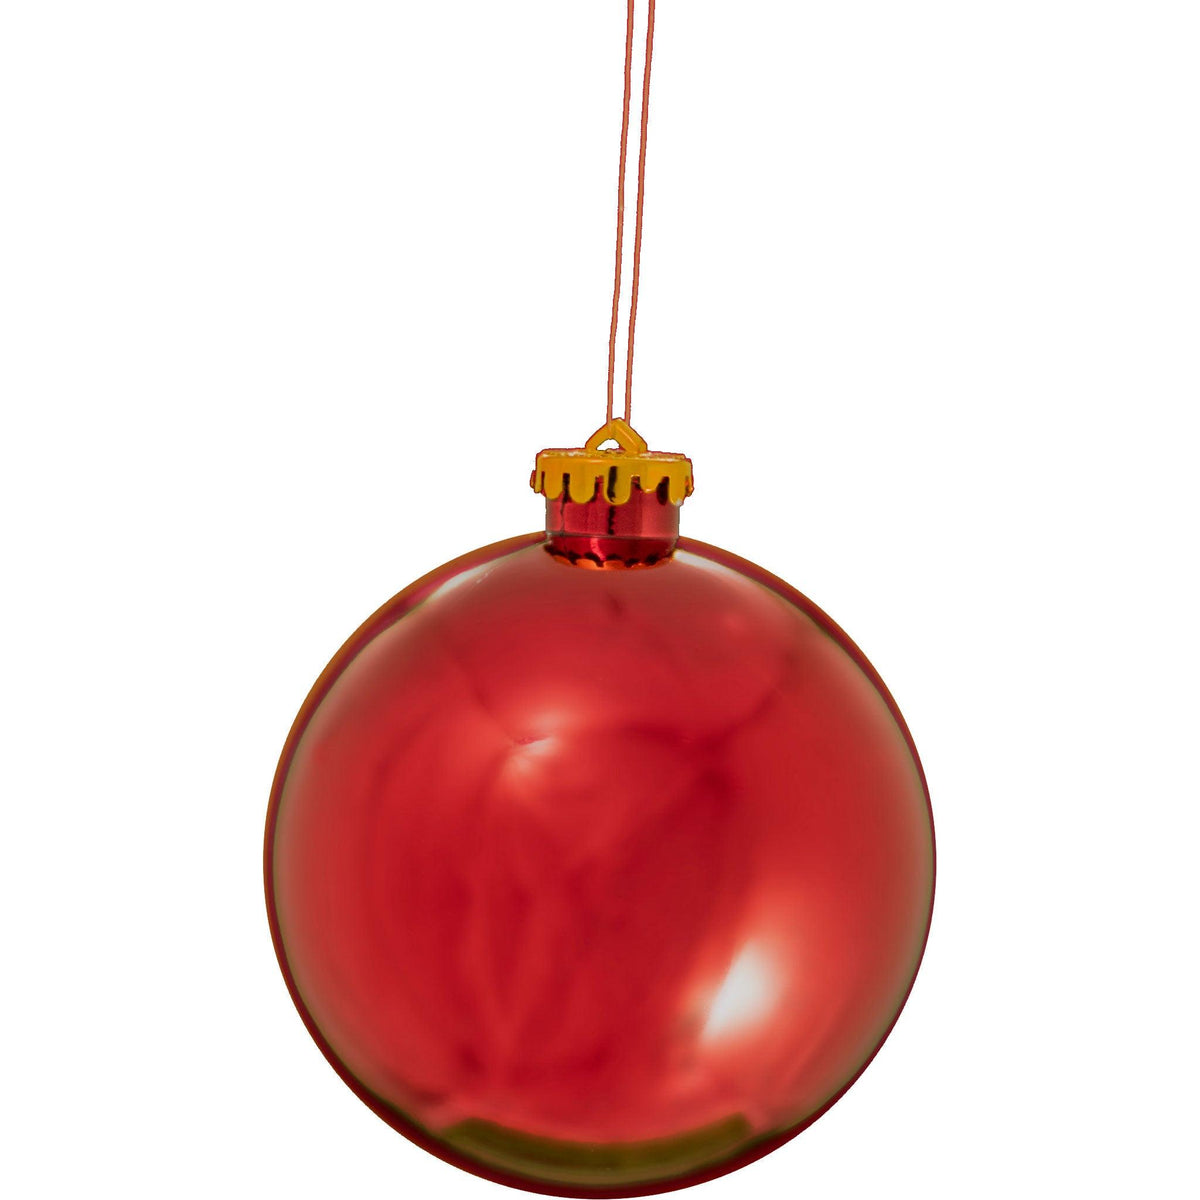 Lee Display offers brand new Shiny Red Plastic Ball Ornaments at wholesale prices for affordable Christmas Tree Hanging and Holiday Decorating on sale at leedisplay.com